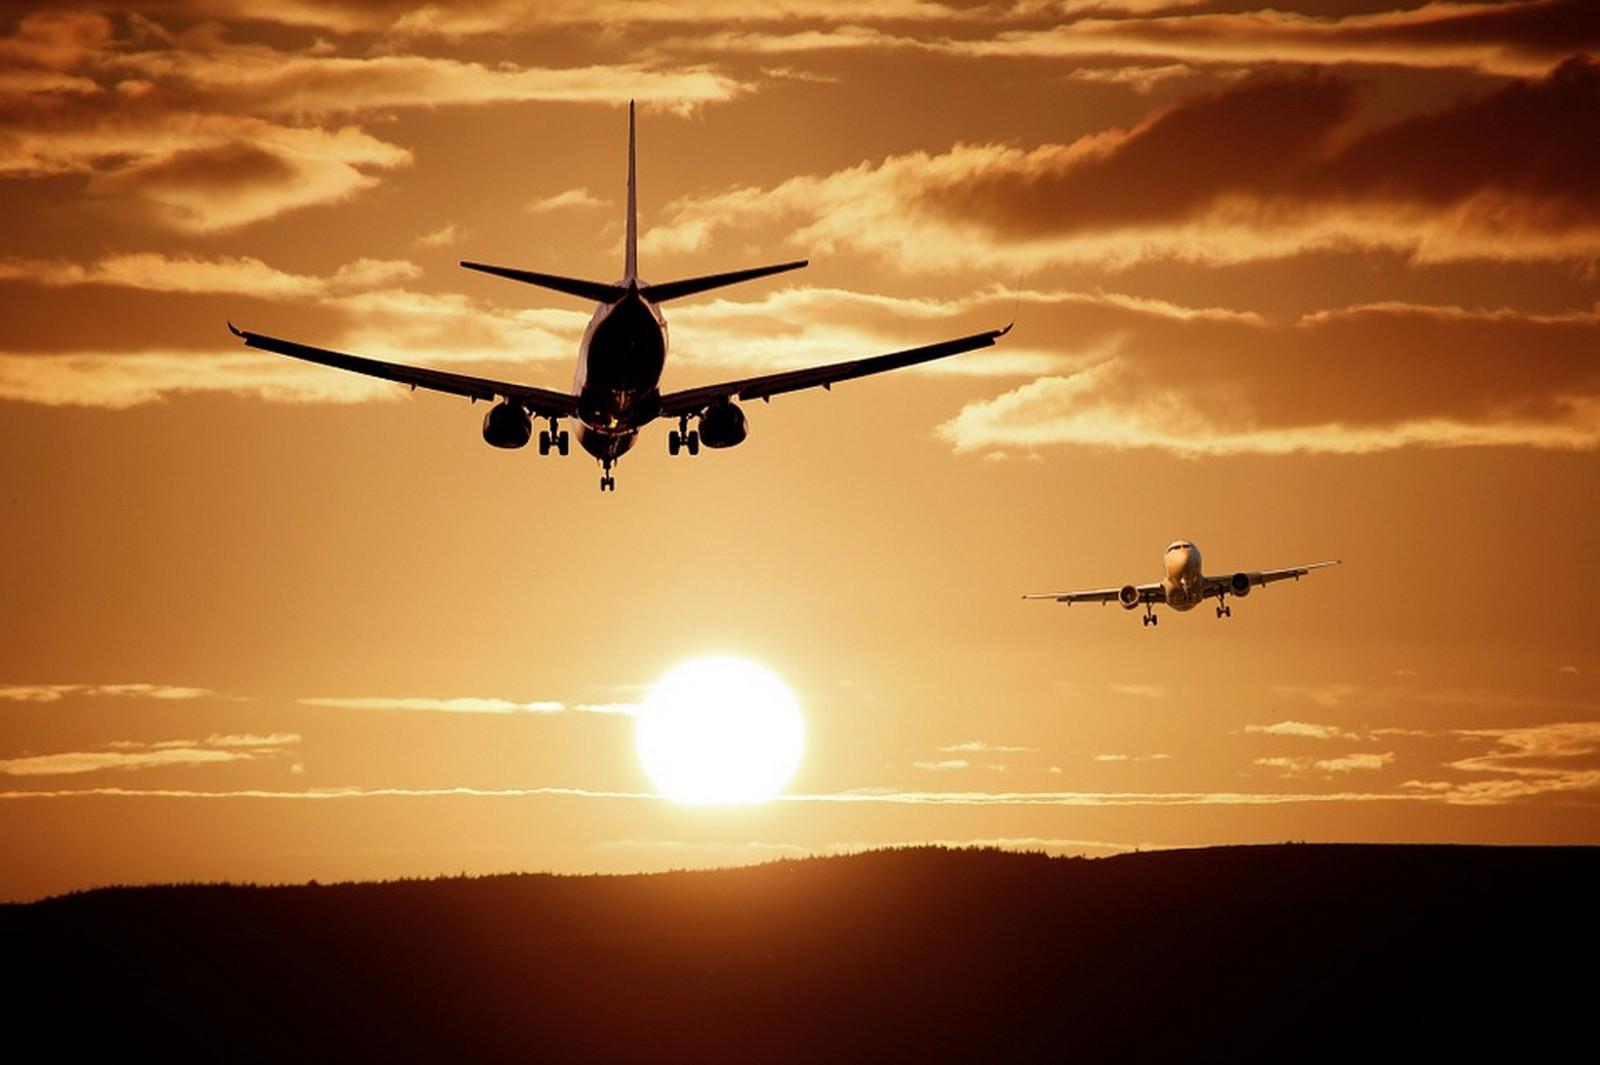 Resource: Airline Award Ticket Hold Policies - Which Airlines Allow What?